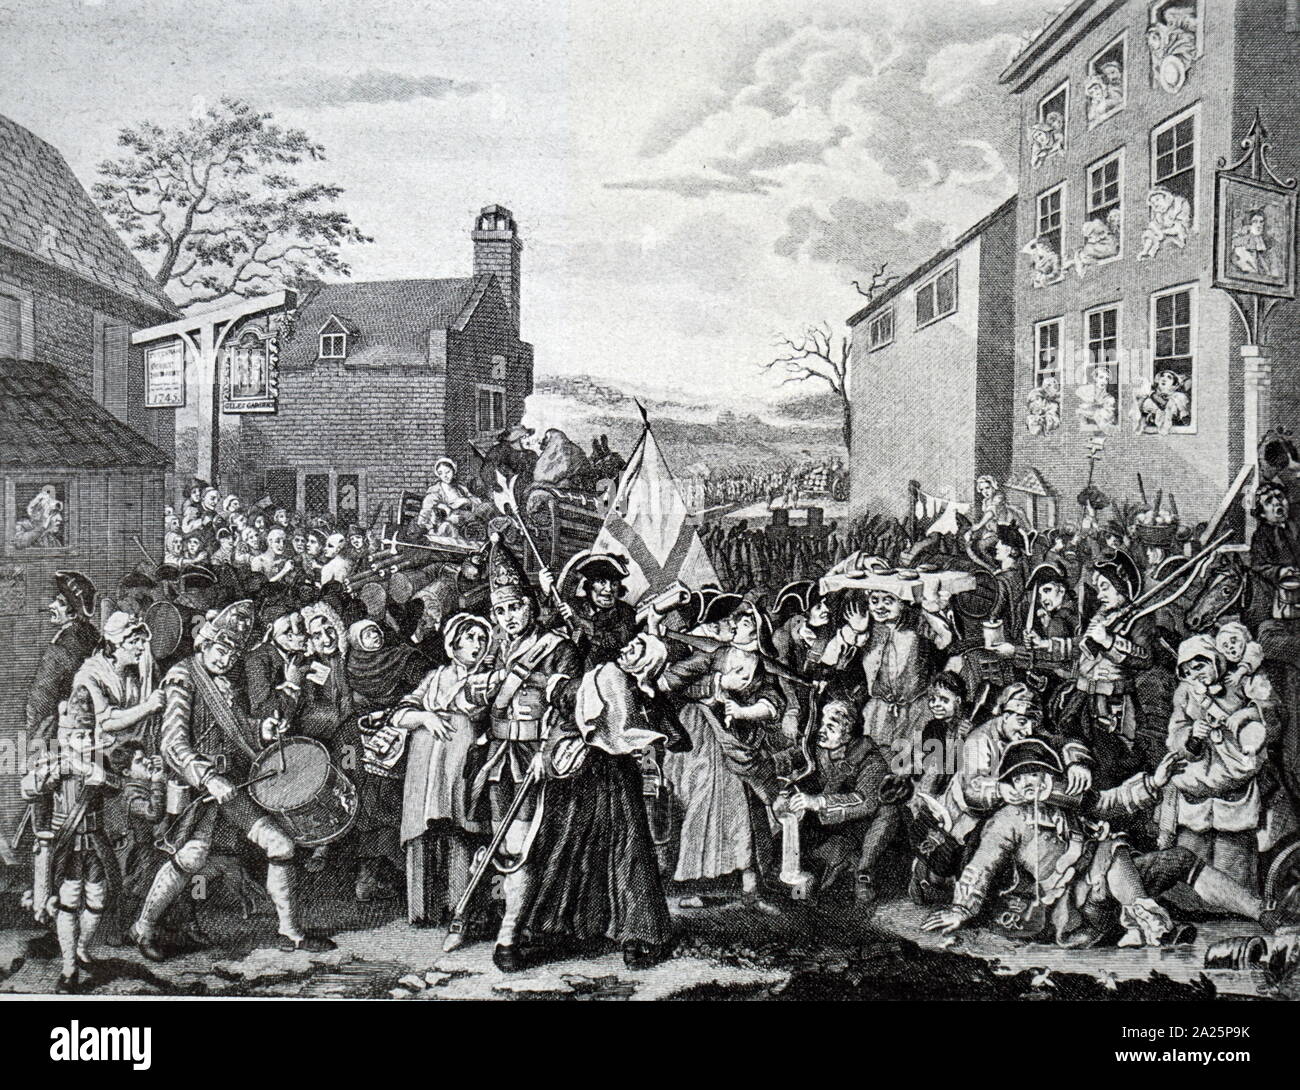 An engraving depicting the english leaving during the jacobite rising. Stock Photo